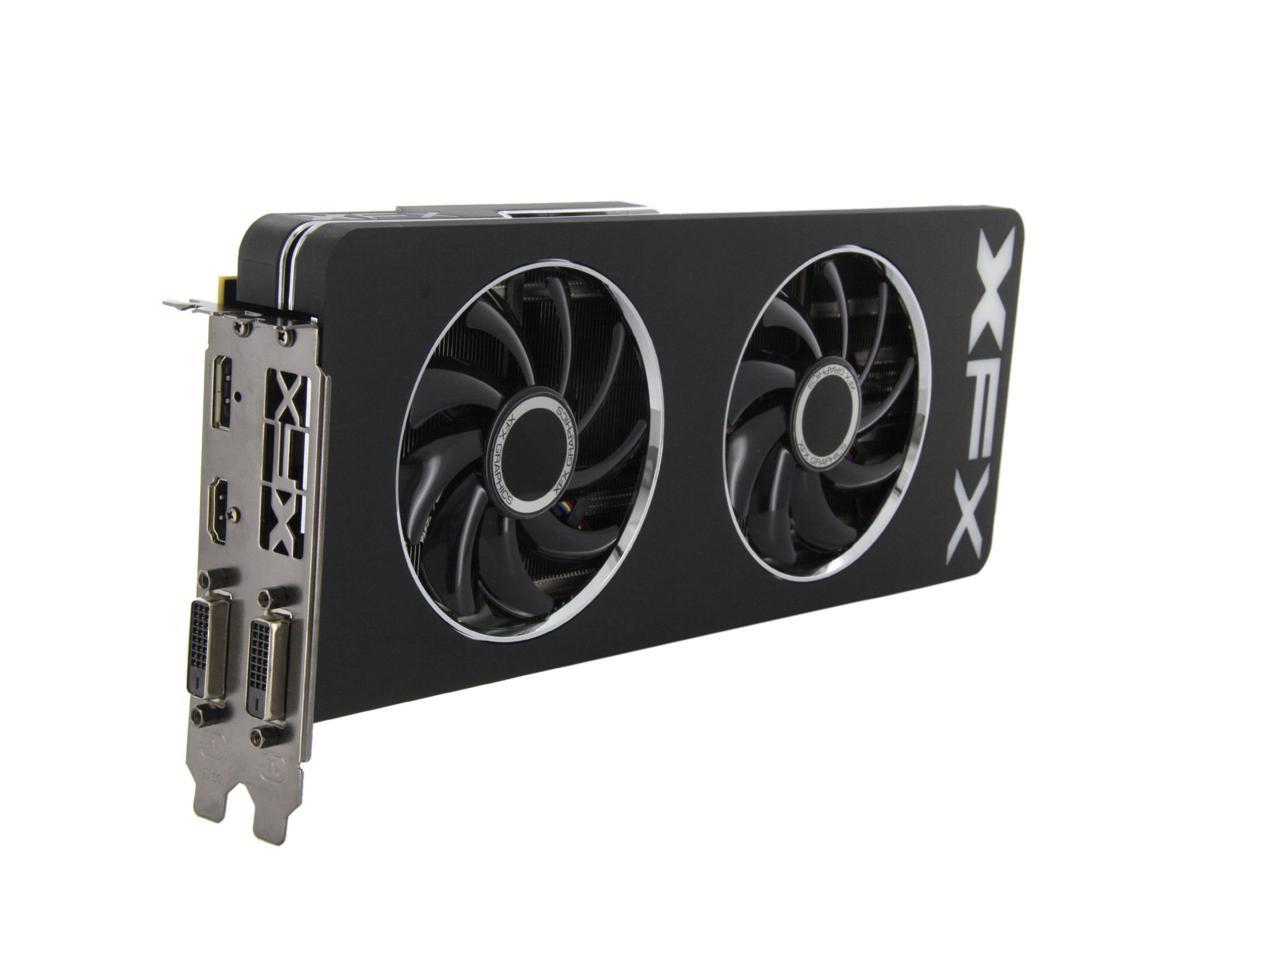 XFX Black Edition Double Dissipation Radeon R9 290 Video Card R9 